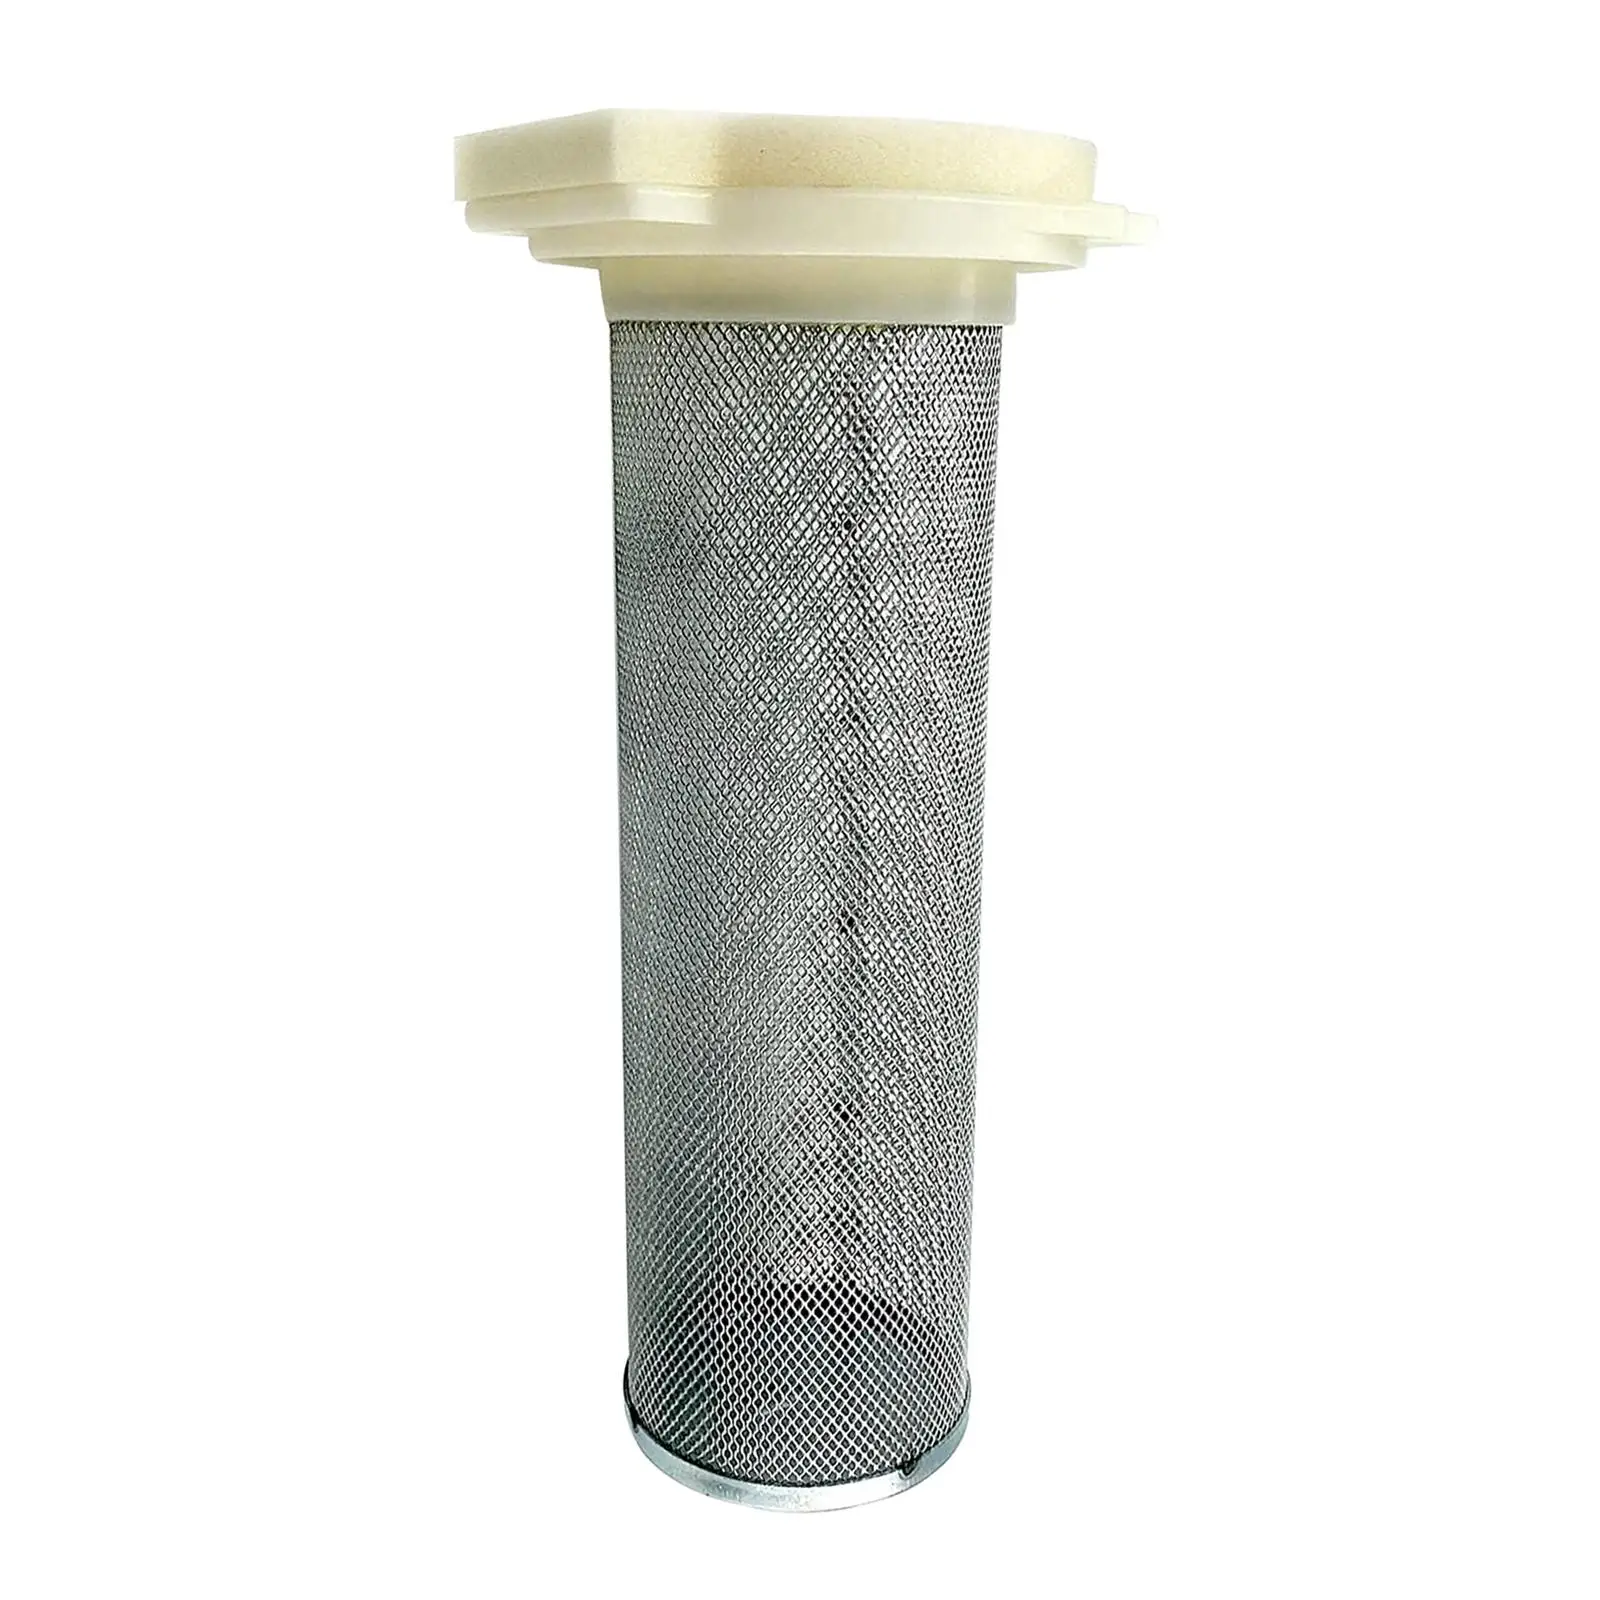 Intake Valve Air Filter Cage 1Uy-14458-01-00 for Yamaha Yfm 350 Durable Replacement